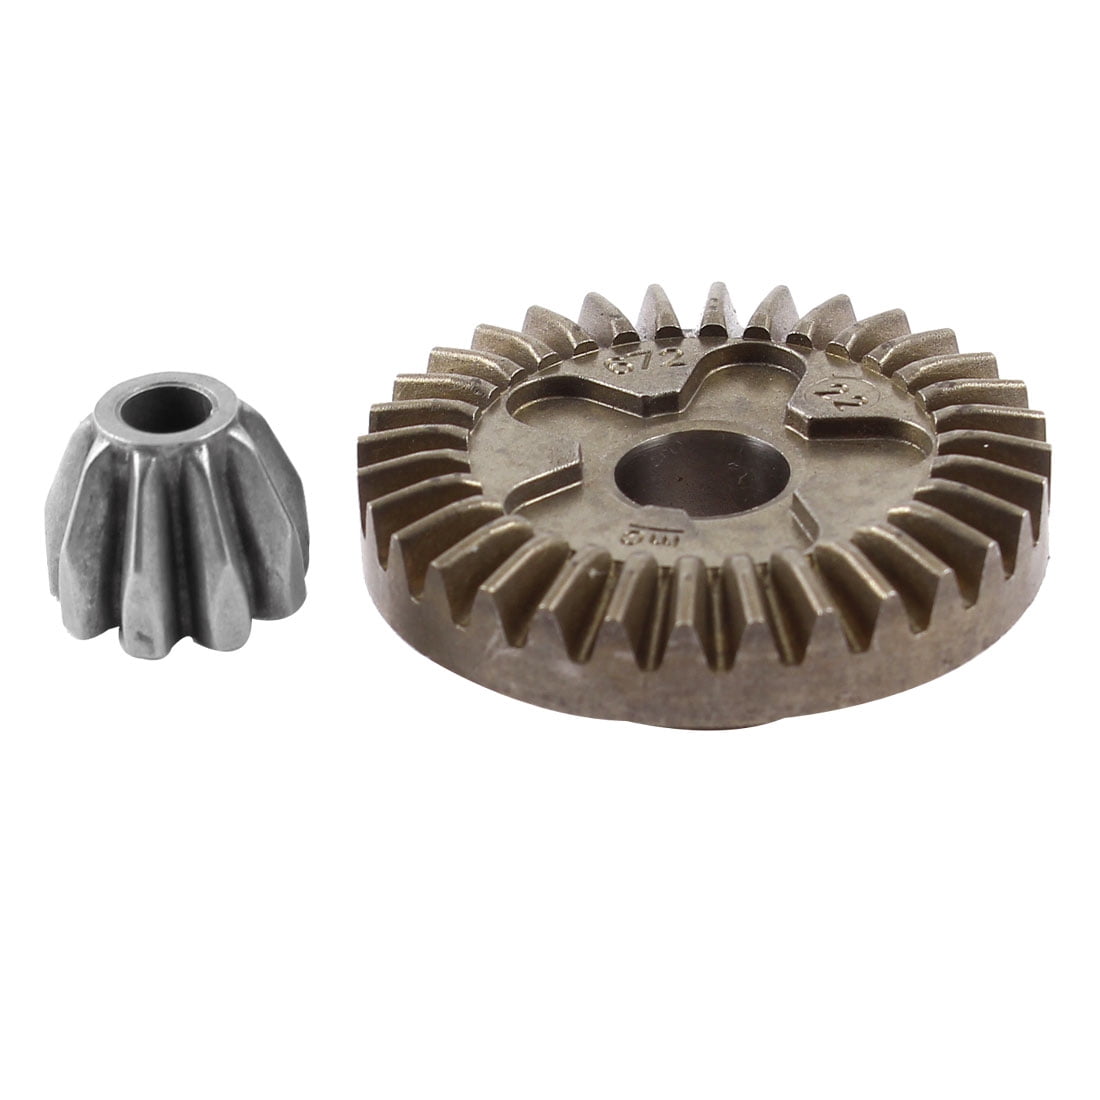 uxcell Replacement Bevel Gear 2 Pcs Set for Bosch GWS 6-100 